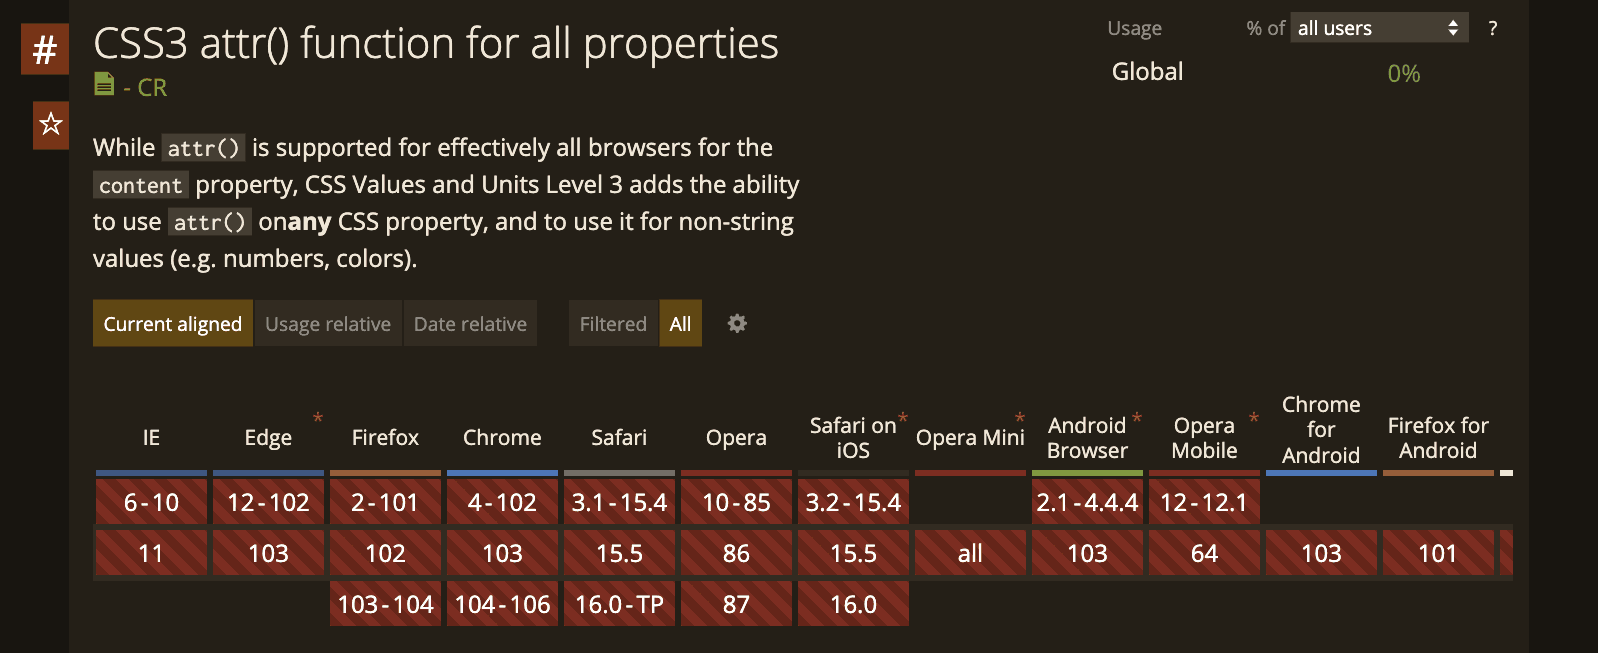 No browser supports attr on all properties